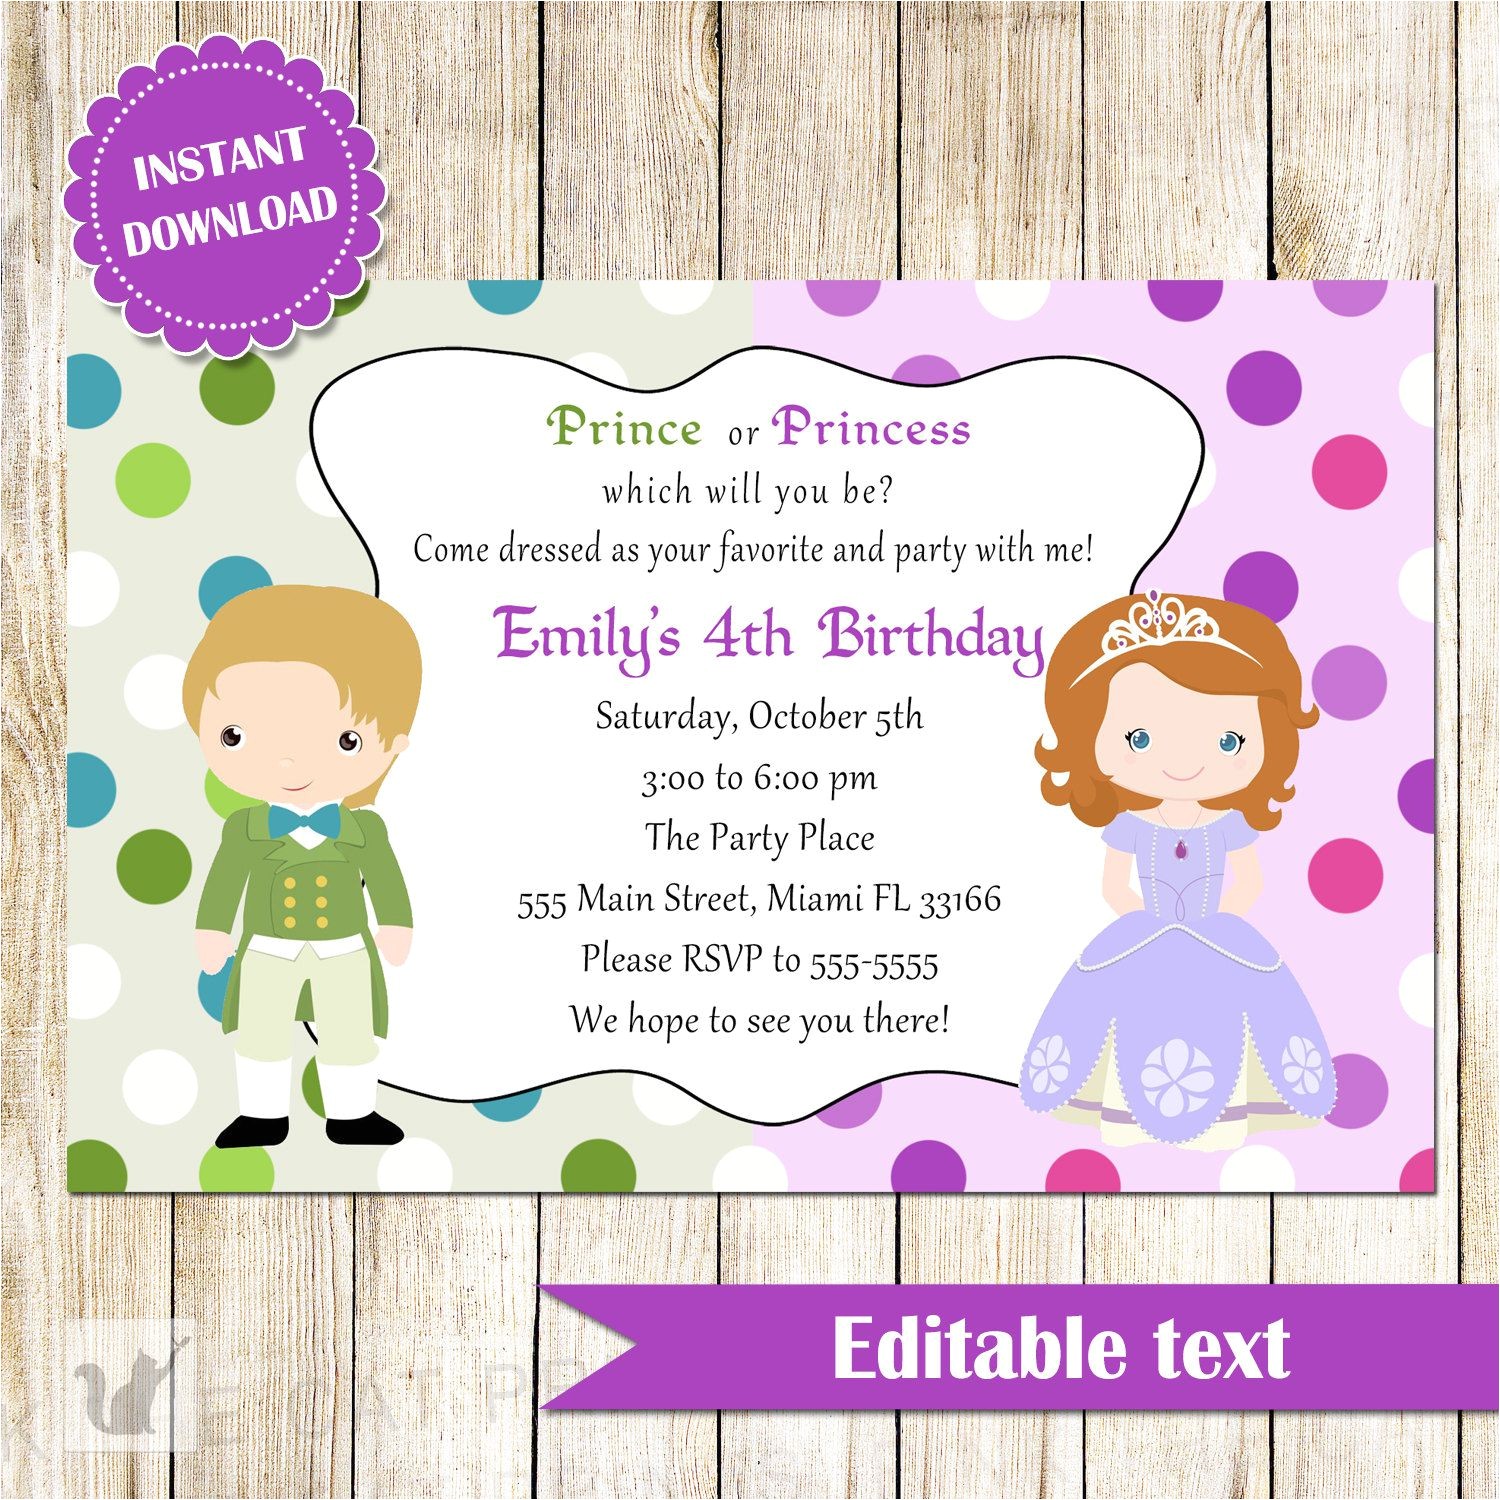 Childrens Party Invitation Template Childrens Birthday Party Invites toddler Birthday Party